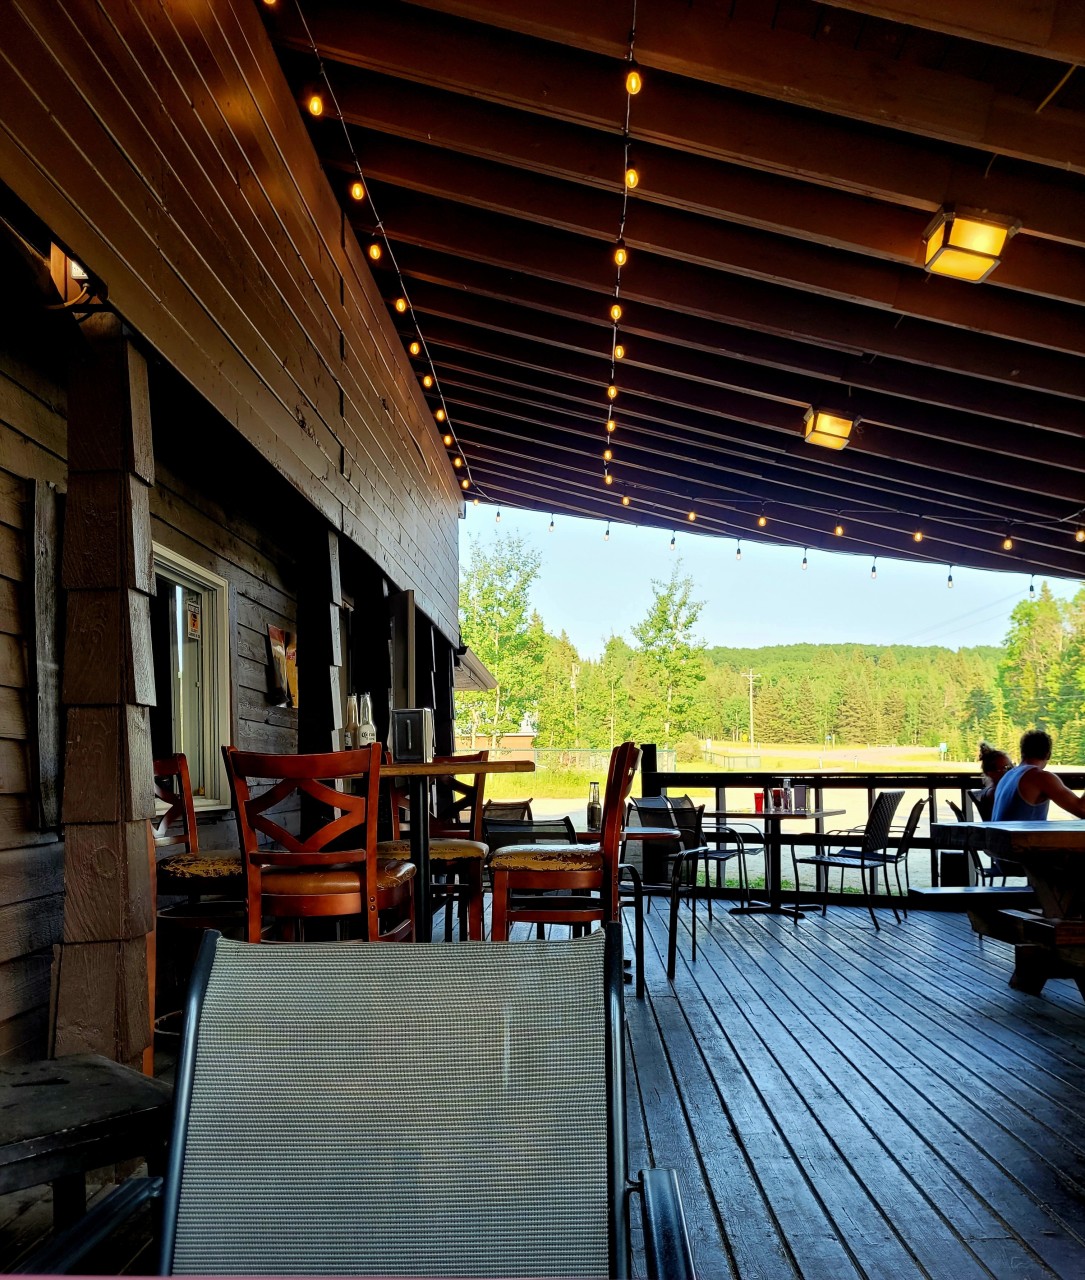 Outdoor Patio at The Bearberry Saloon - Sundre Alberta Canada - Enjoy the summer weather at the awesome Bearberry Saloon outdoor patio. Open 6 days a week, this is one historic Saloon you just gotta visit!
Bearberry Saloon, Sundre, Alberta, Canada